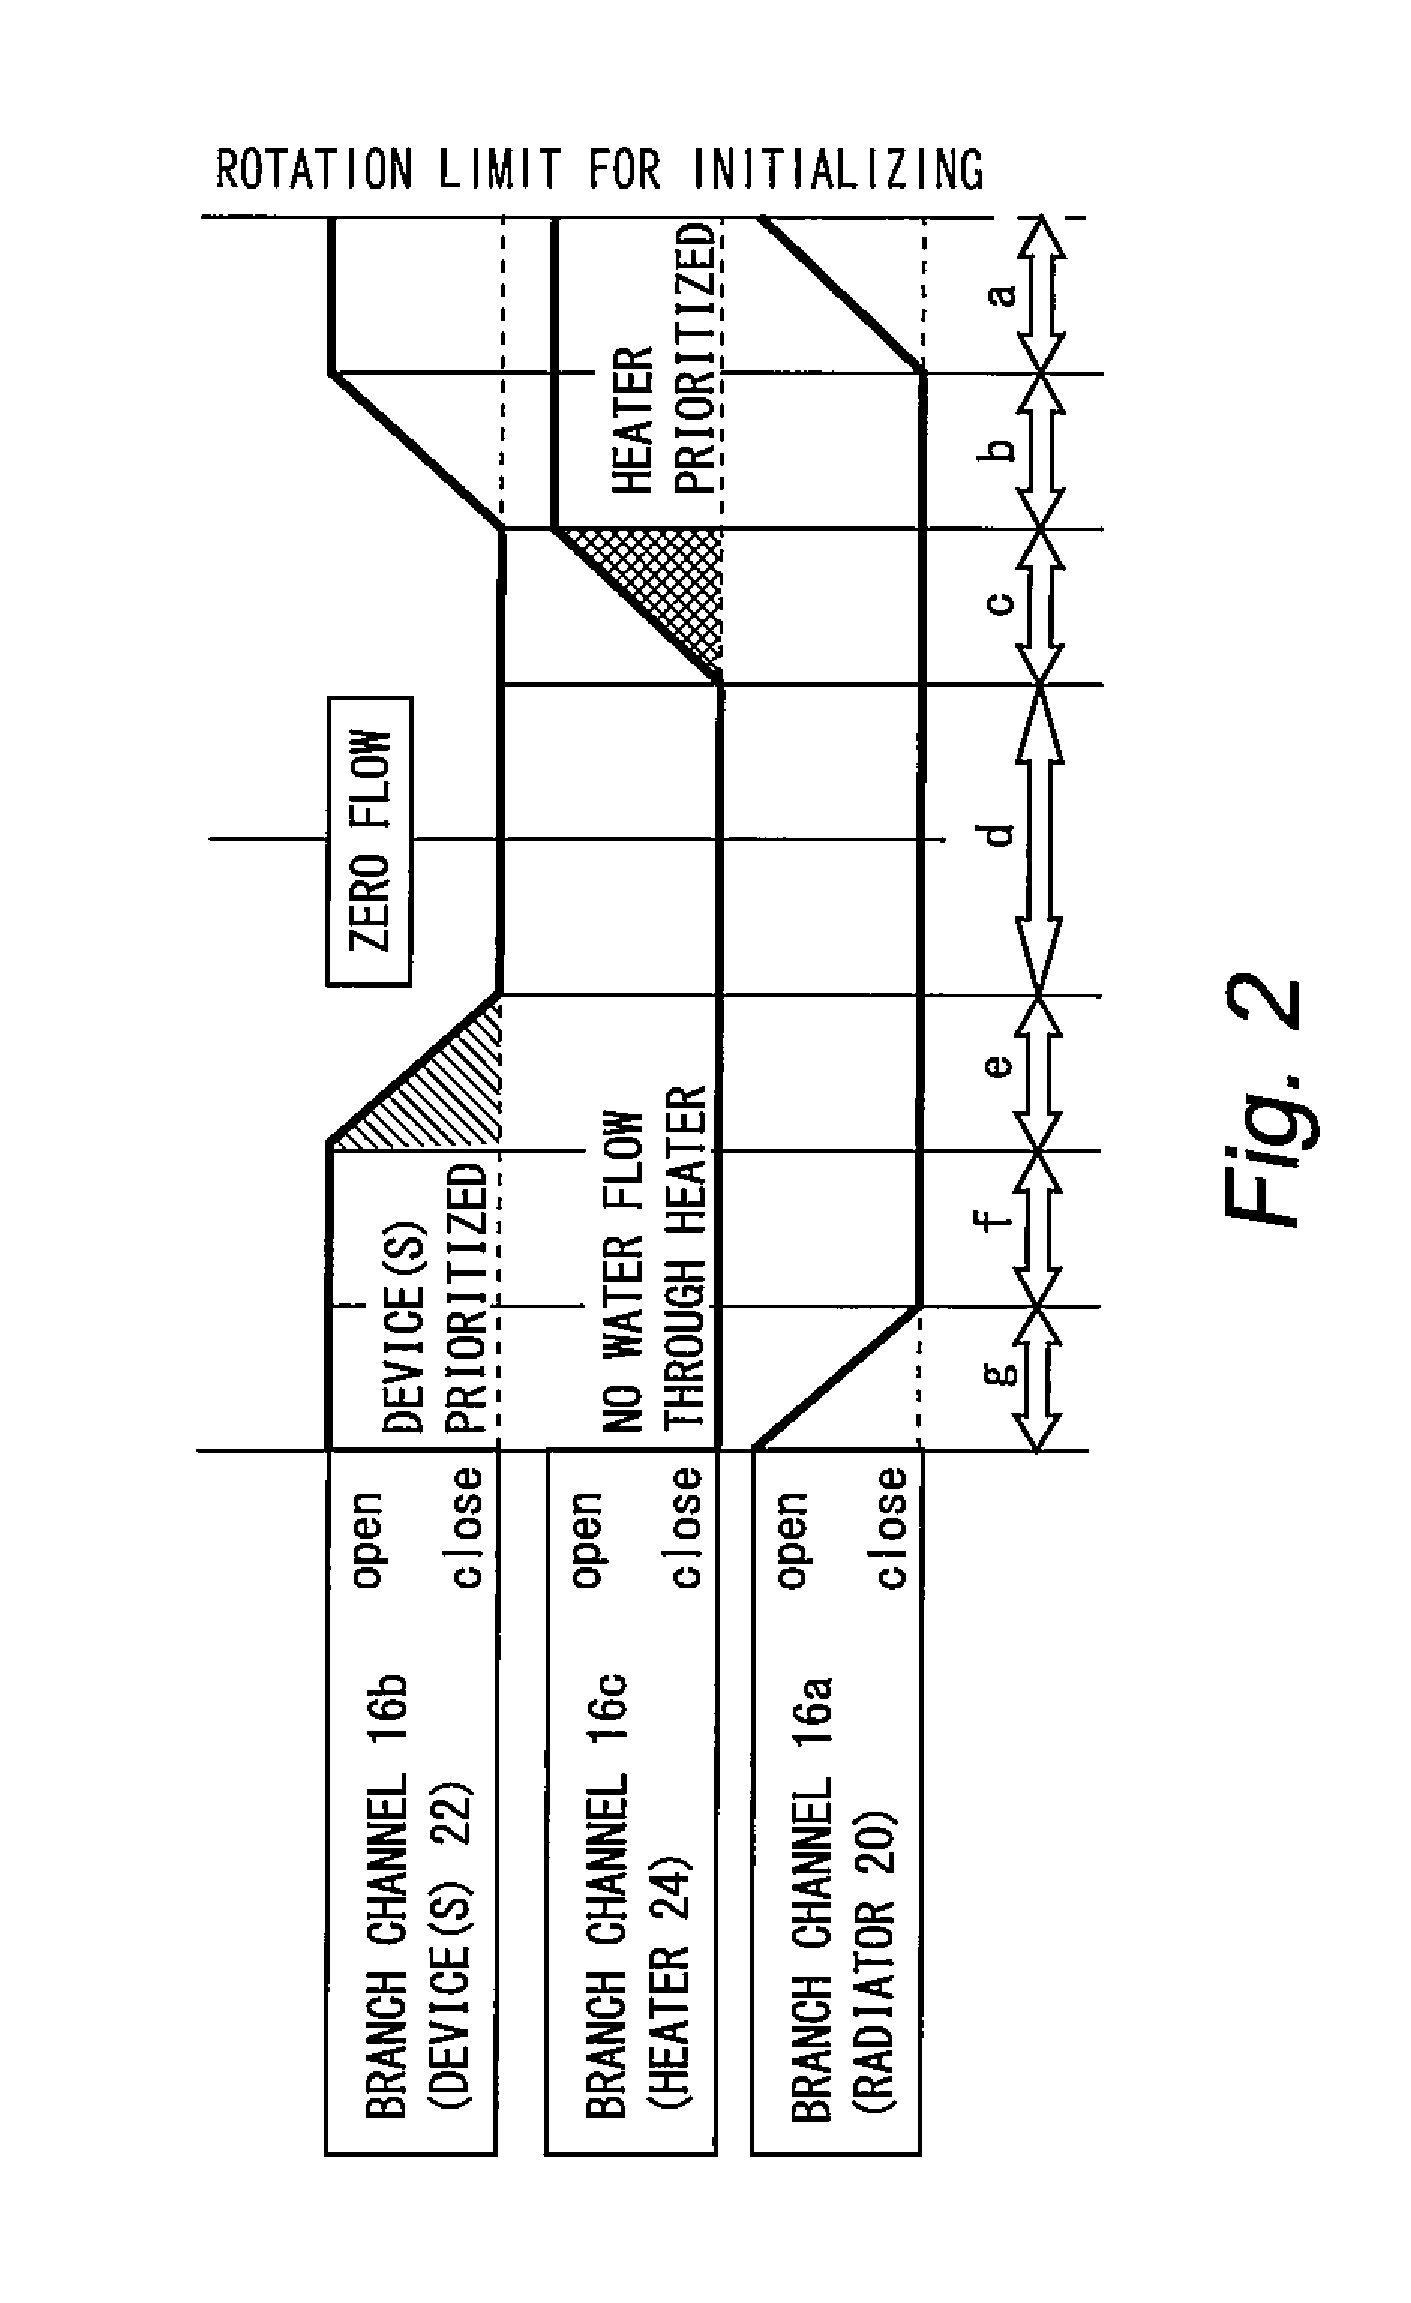 Cooling apparatus for internal combustion engine